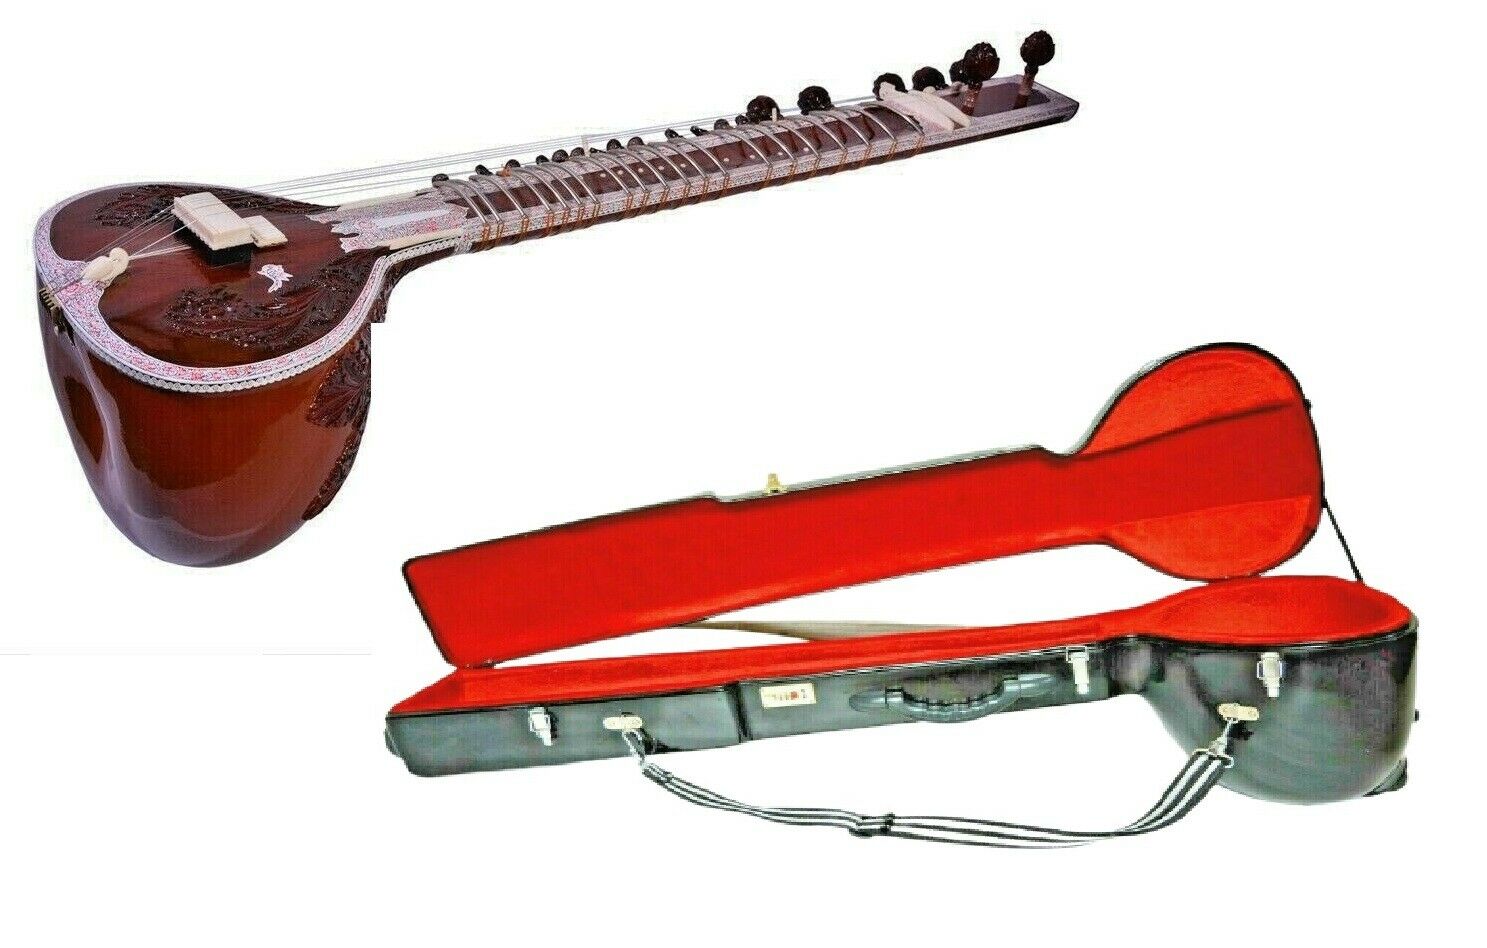 11 Or 13 Sympathetic String Instrument Sitar With High Quality Fiber Box